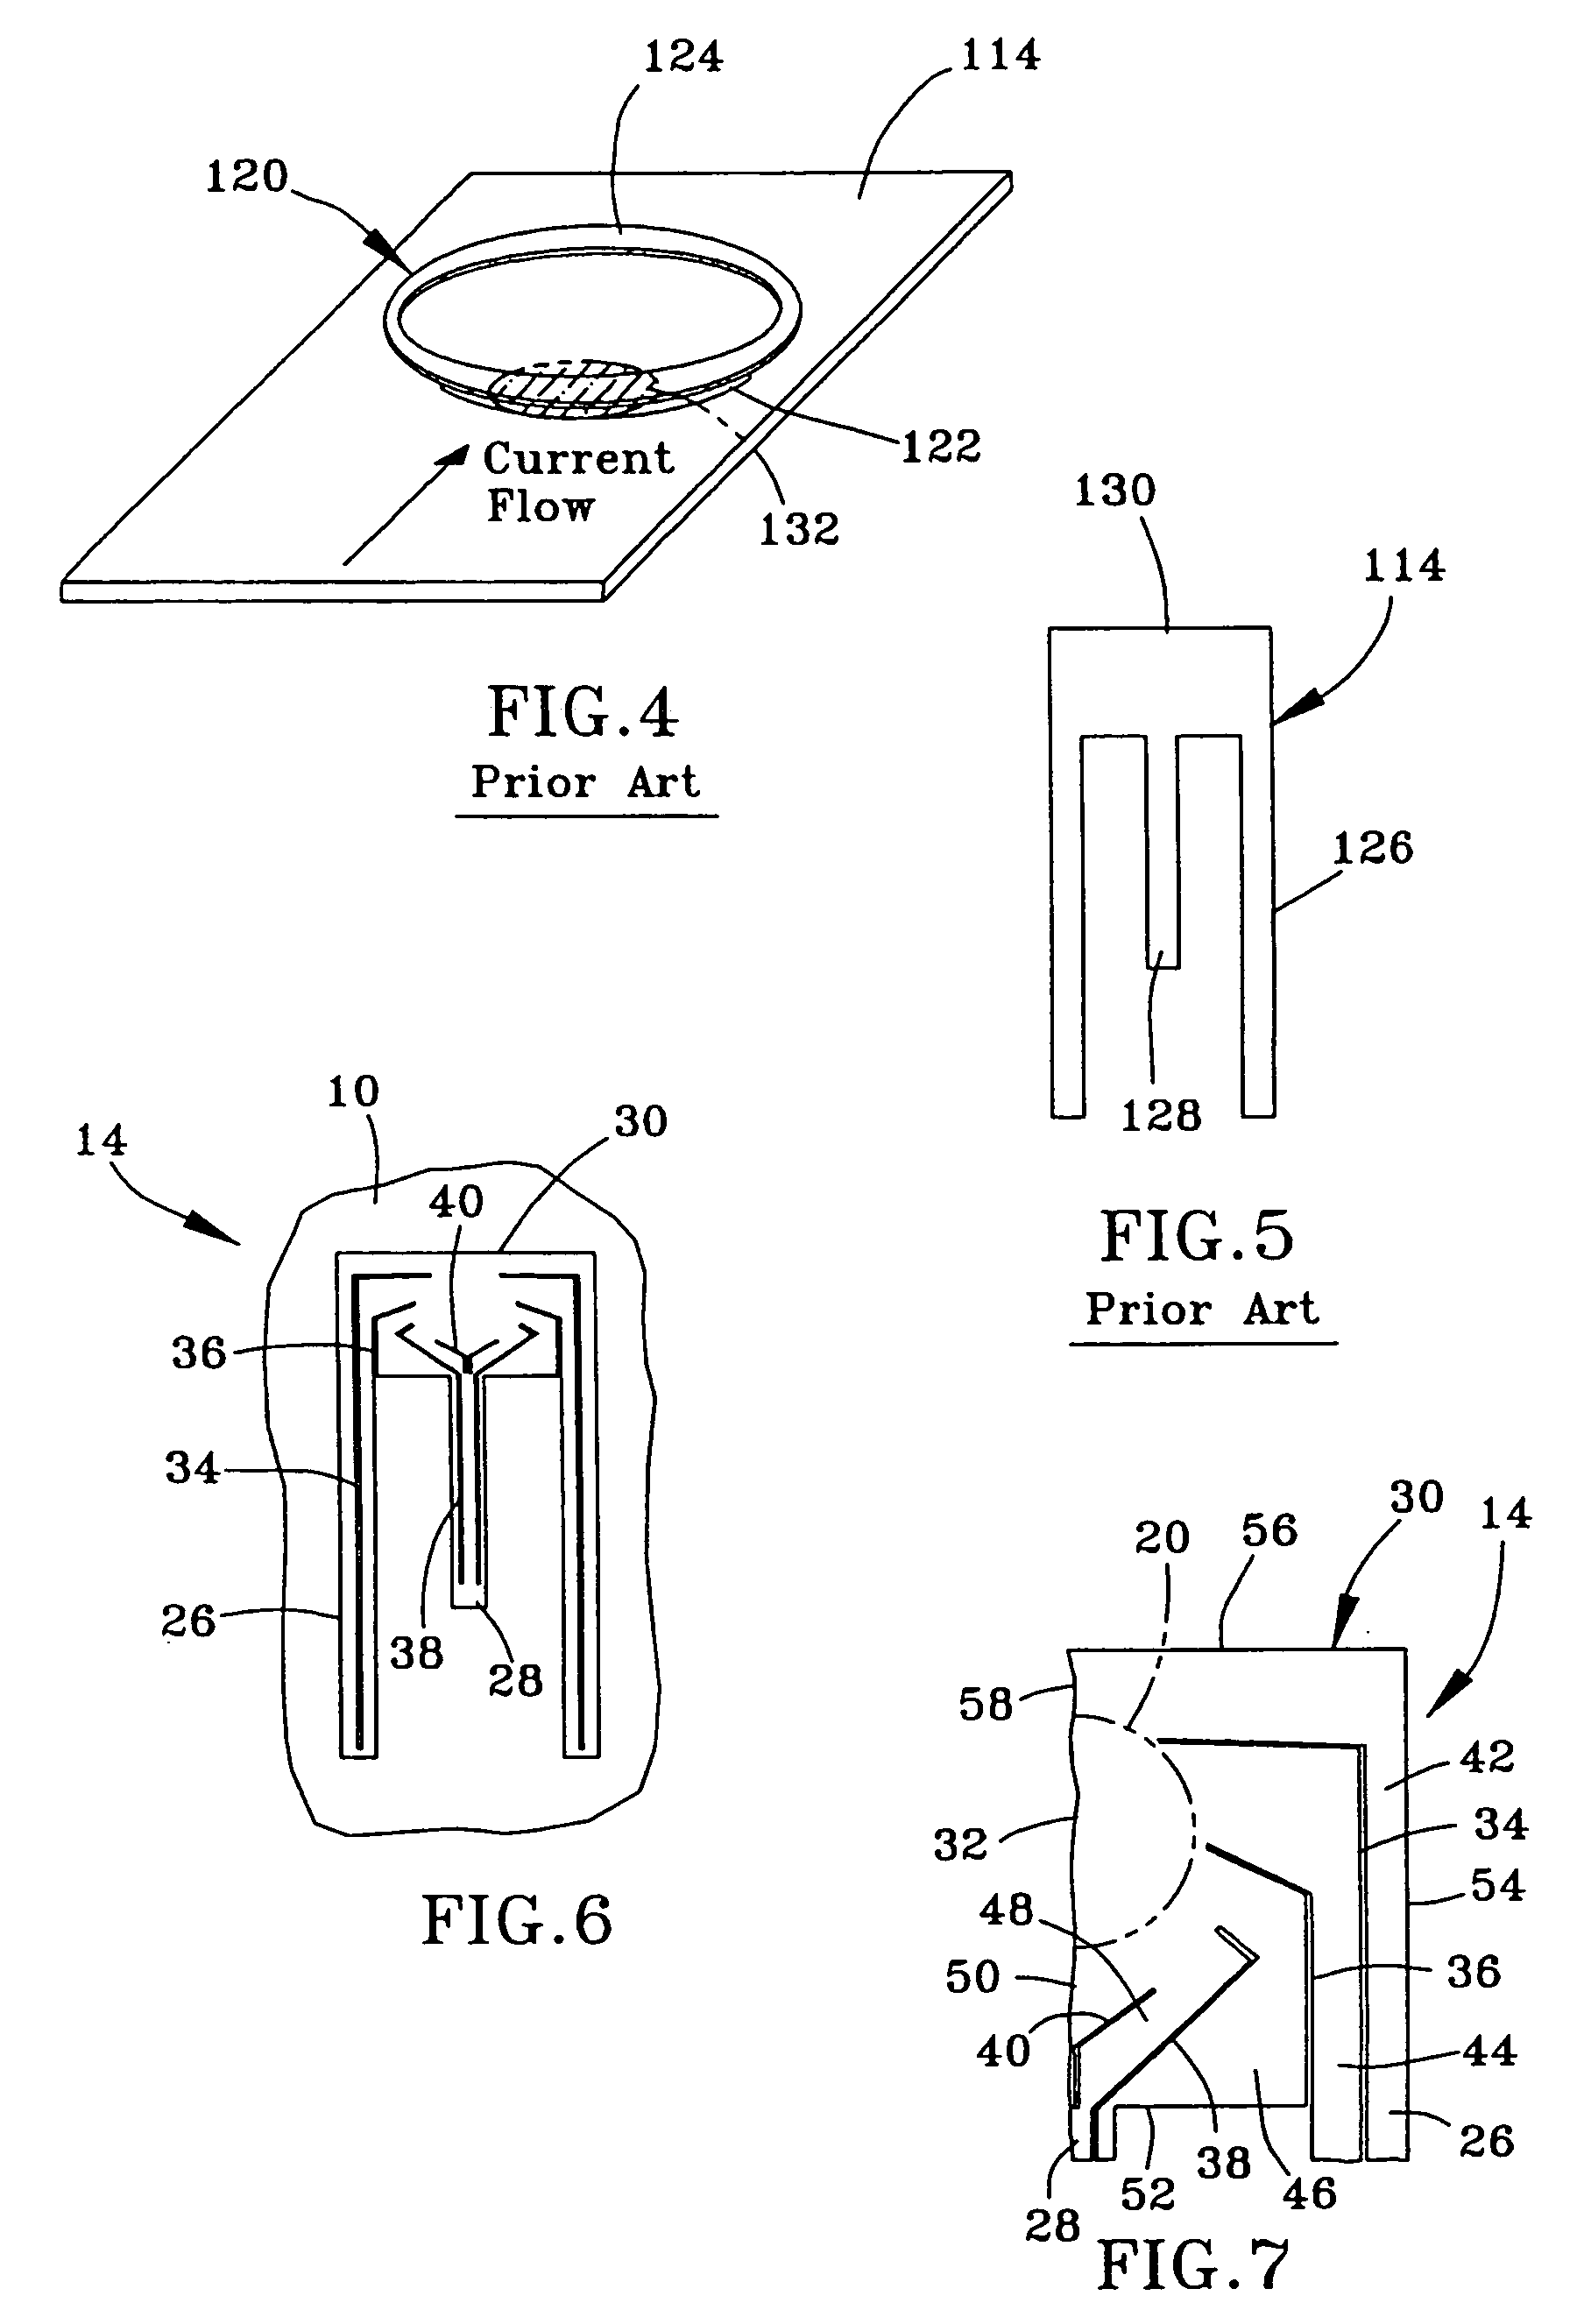 Flip-chip interconnect with increased current-carrying capability